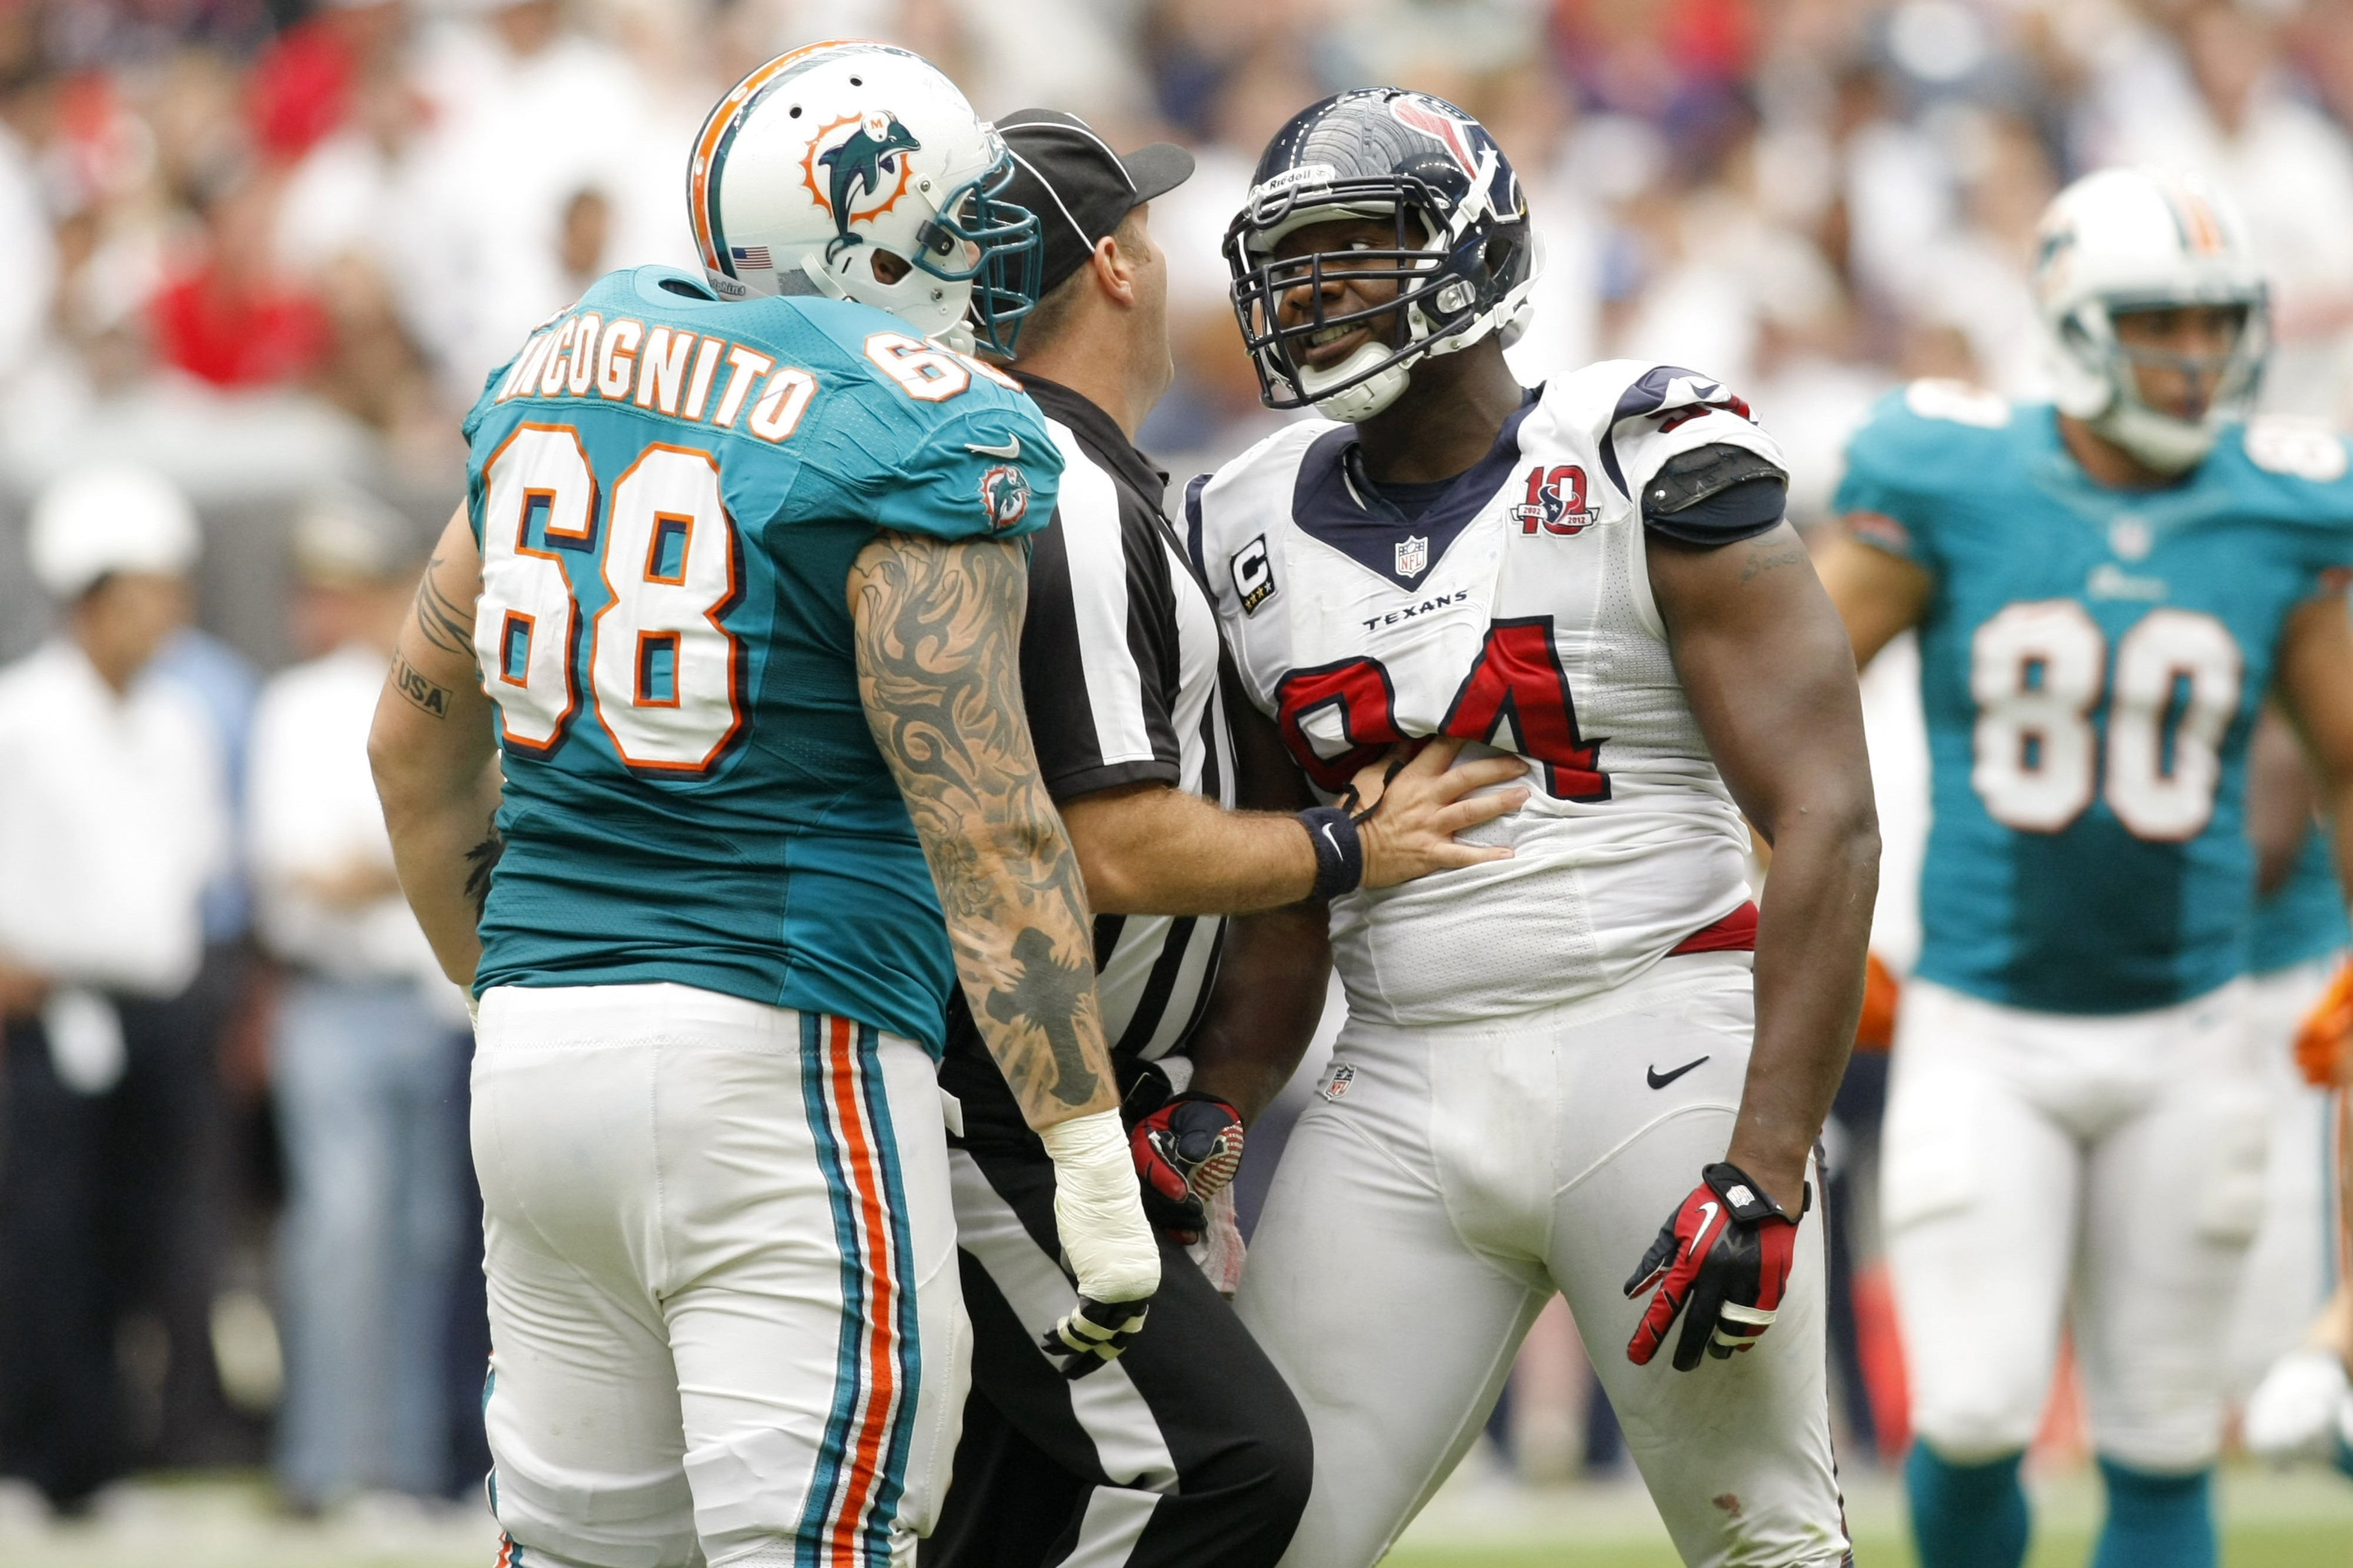 Richie Incognito and Antonio Smith don't like each other one bit